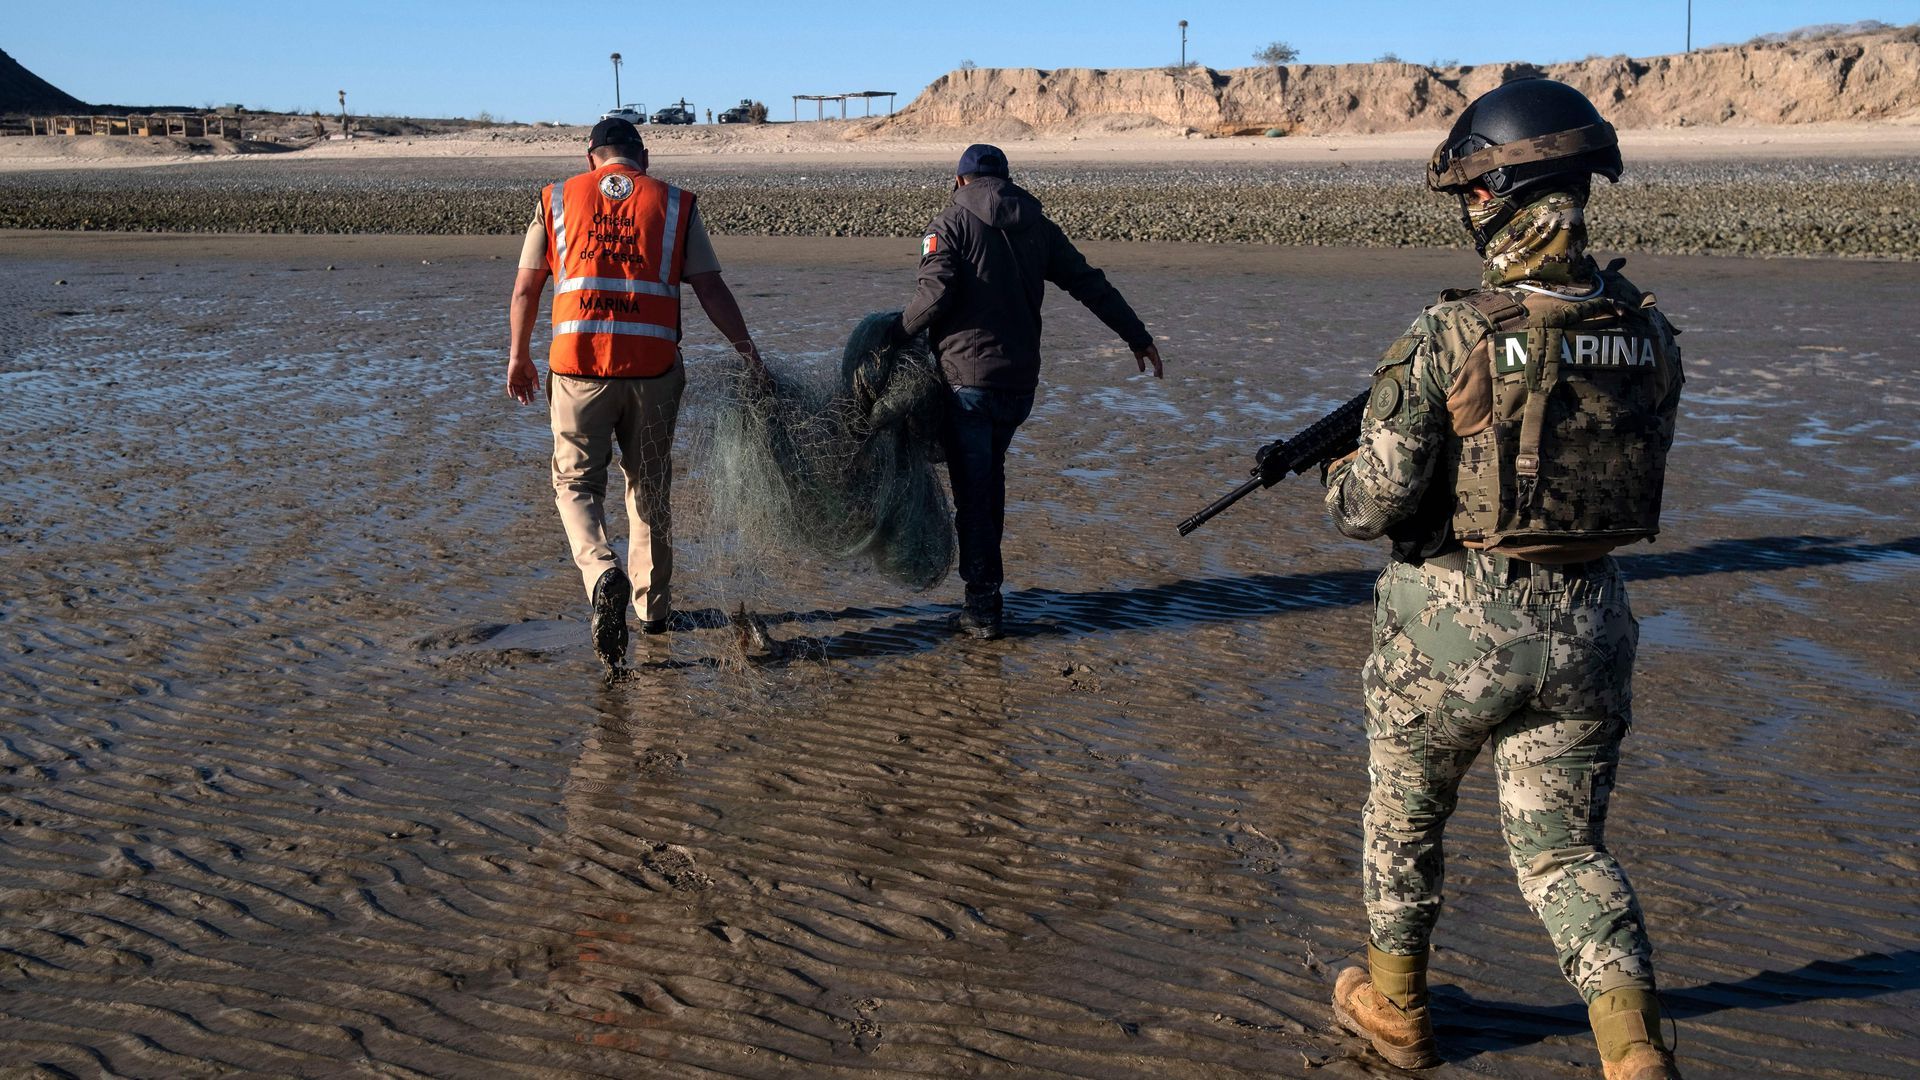 An armed Mexican Navy officer walks behind two people carrying an illegal fishing net in the Sea of Cortez in Mexico